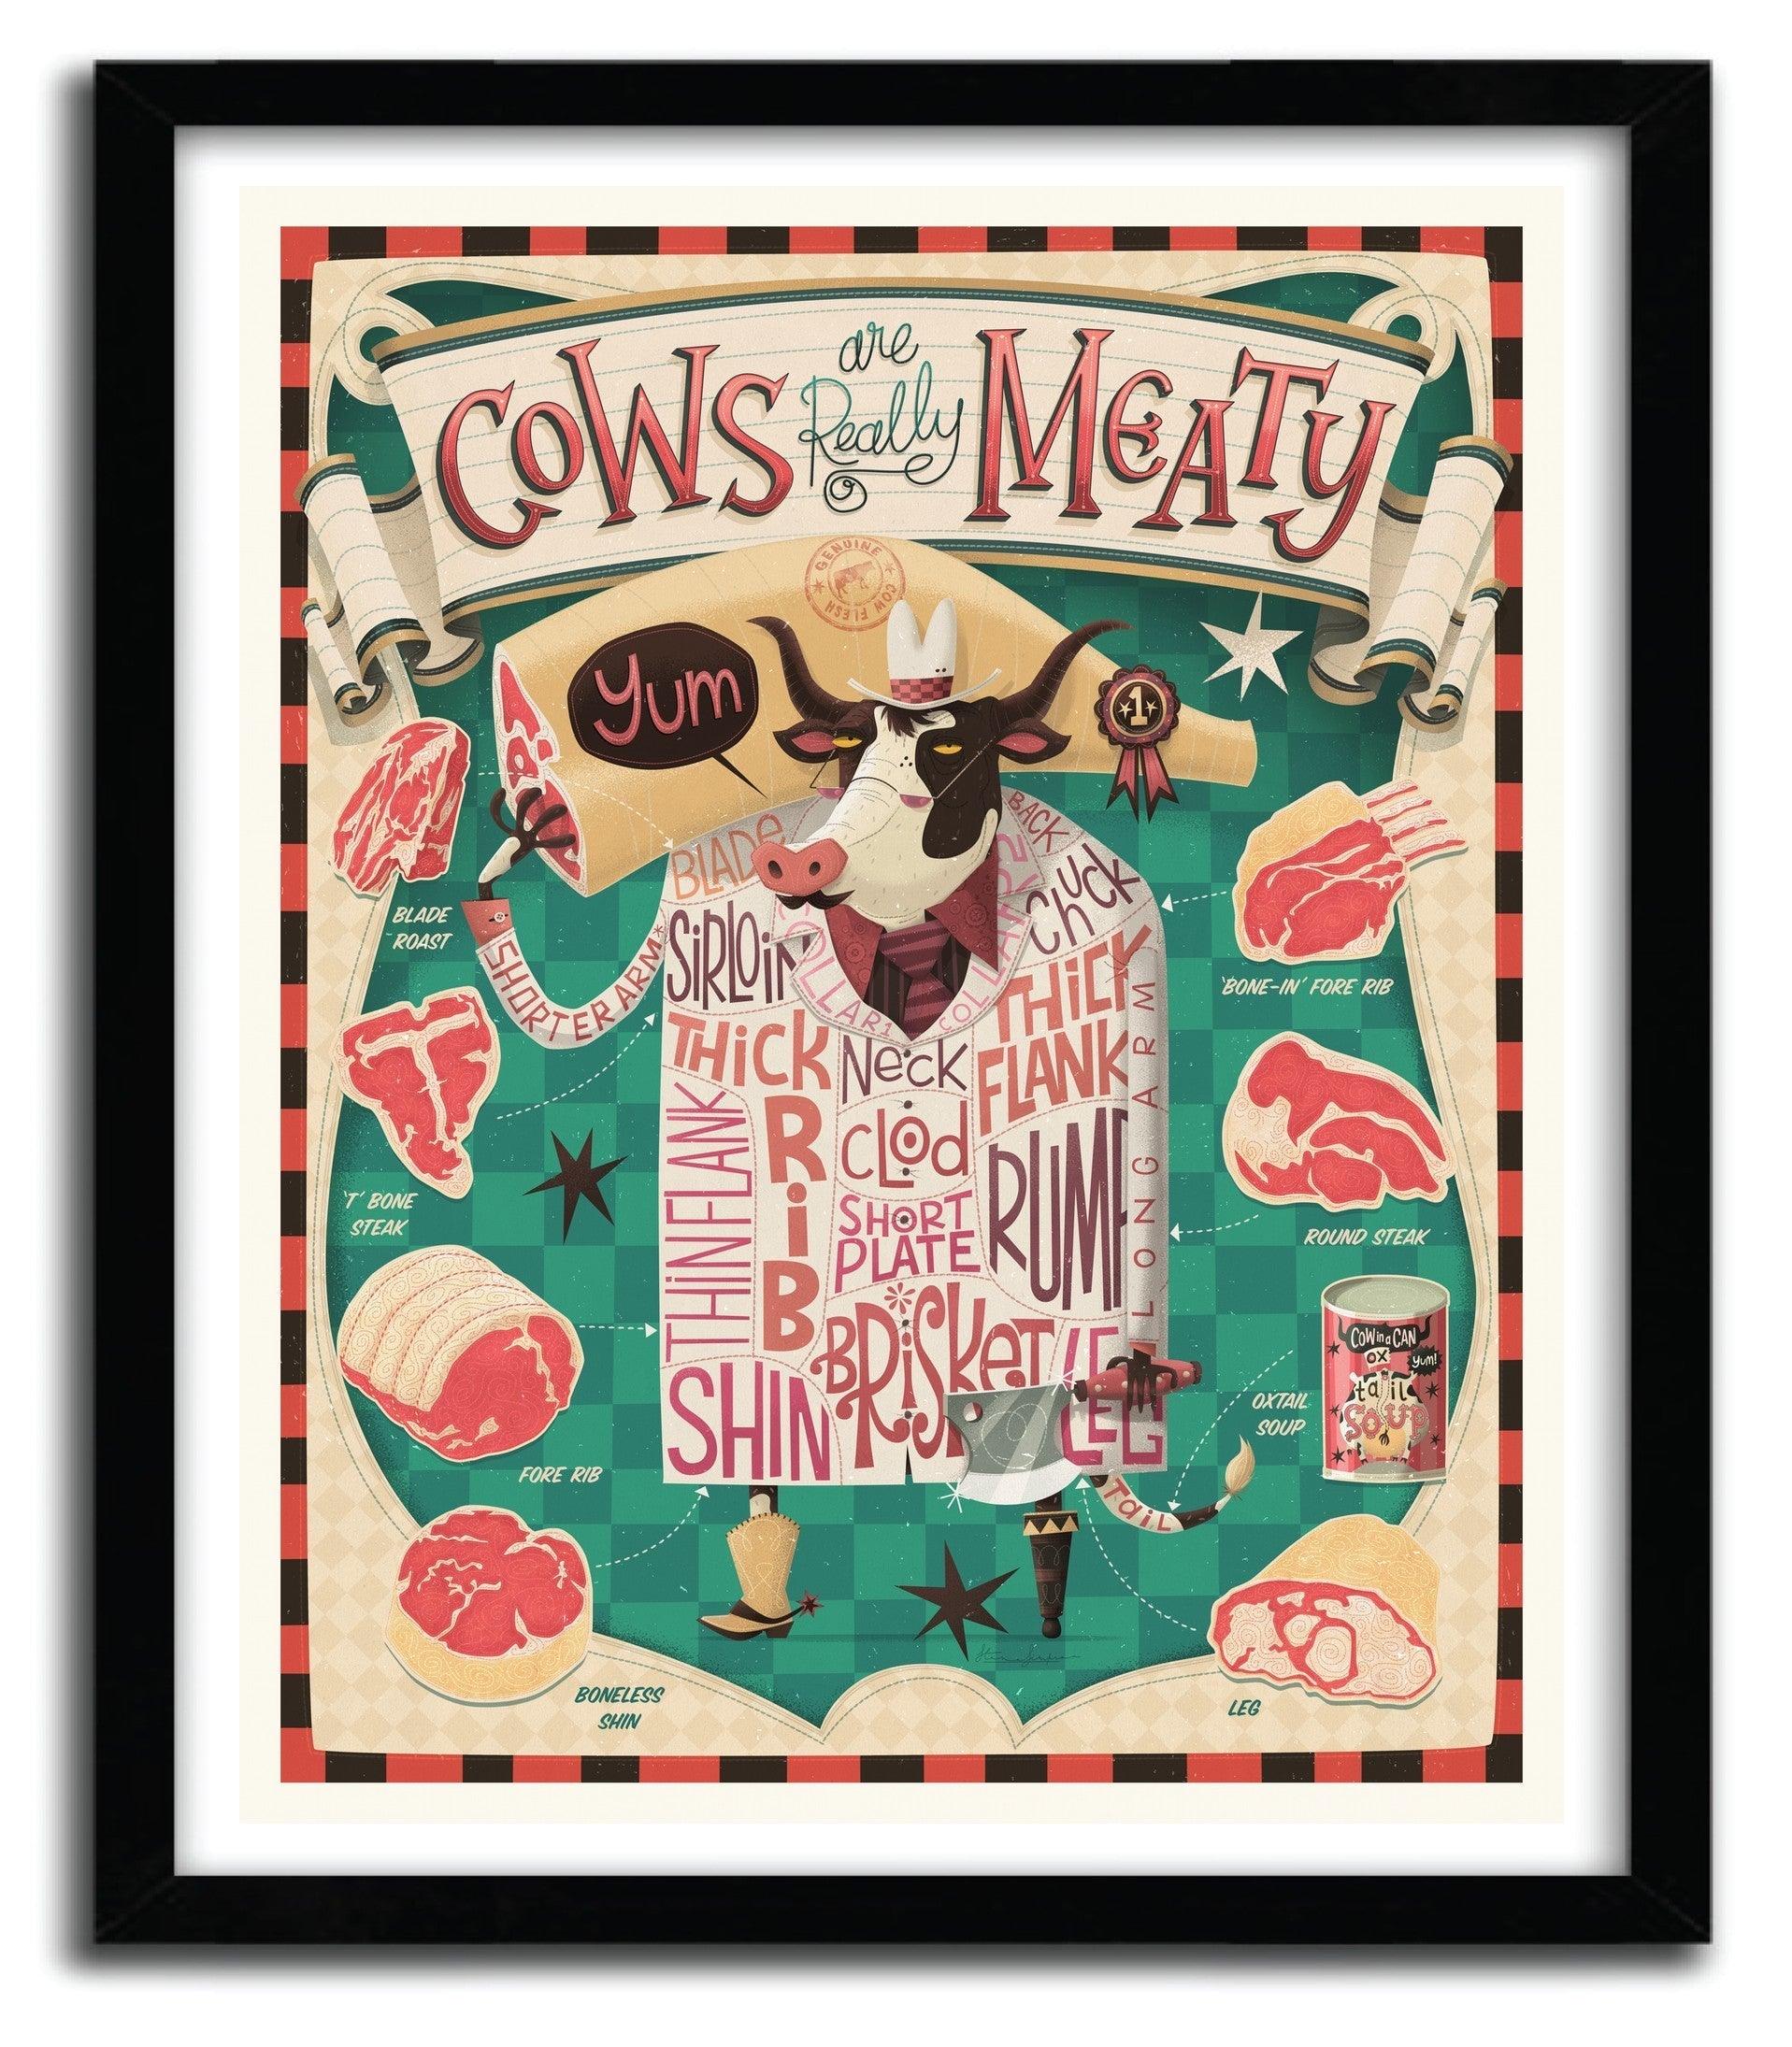 Affiche Cows are REALLY Meaty! by STEVE SIMPSON ArtAndToys